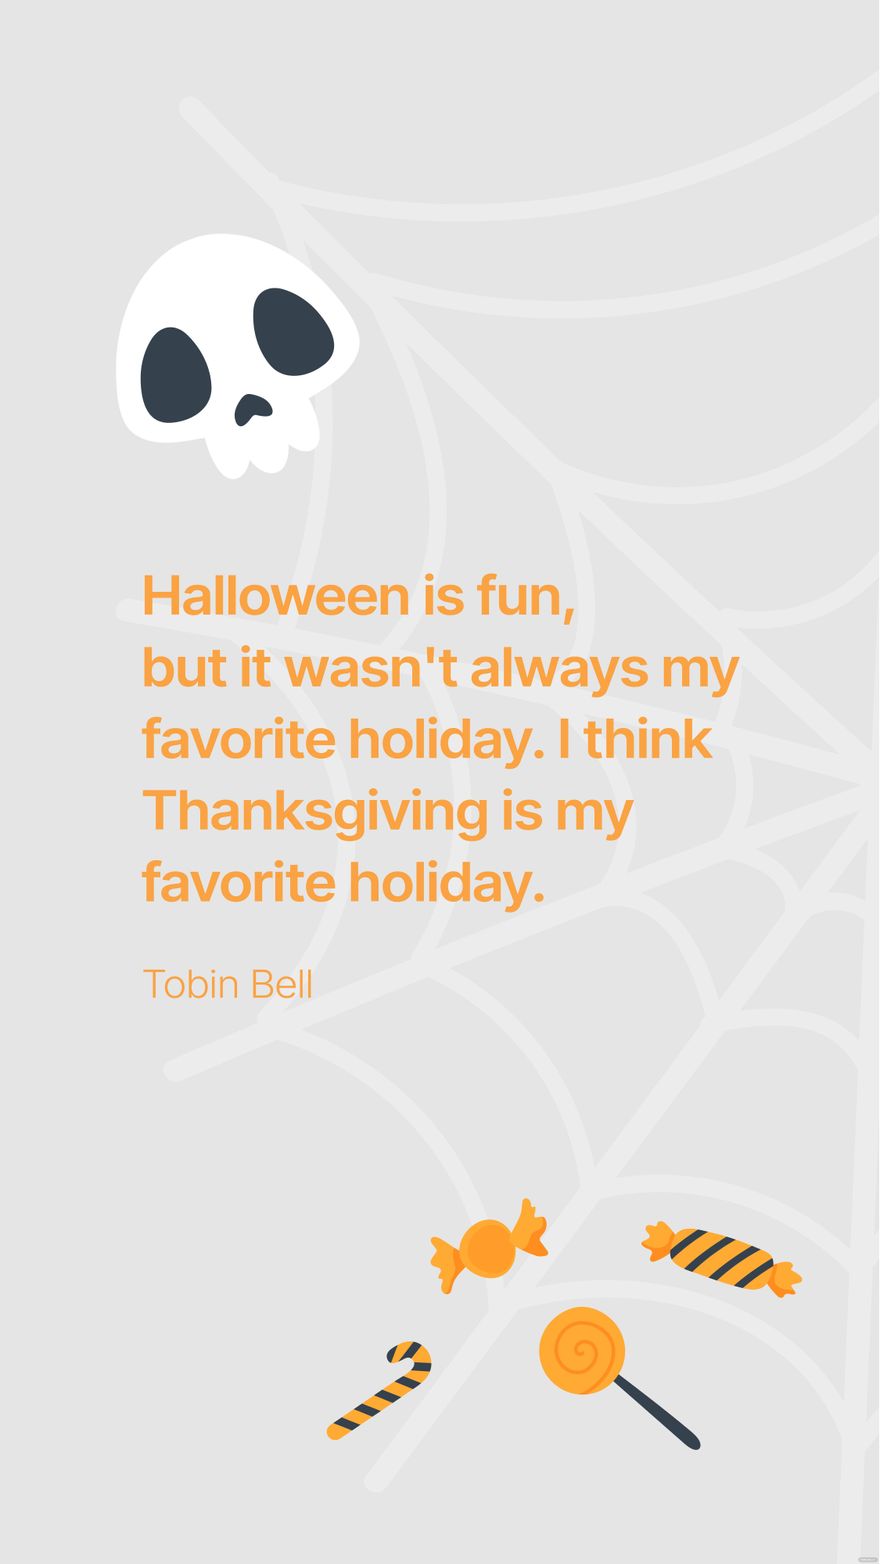 Tobin Bell- Halloween is fun, but it wasn't always my favorite holiday. I think Thanksgiving is my favorite holiday. 